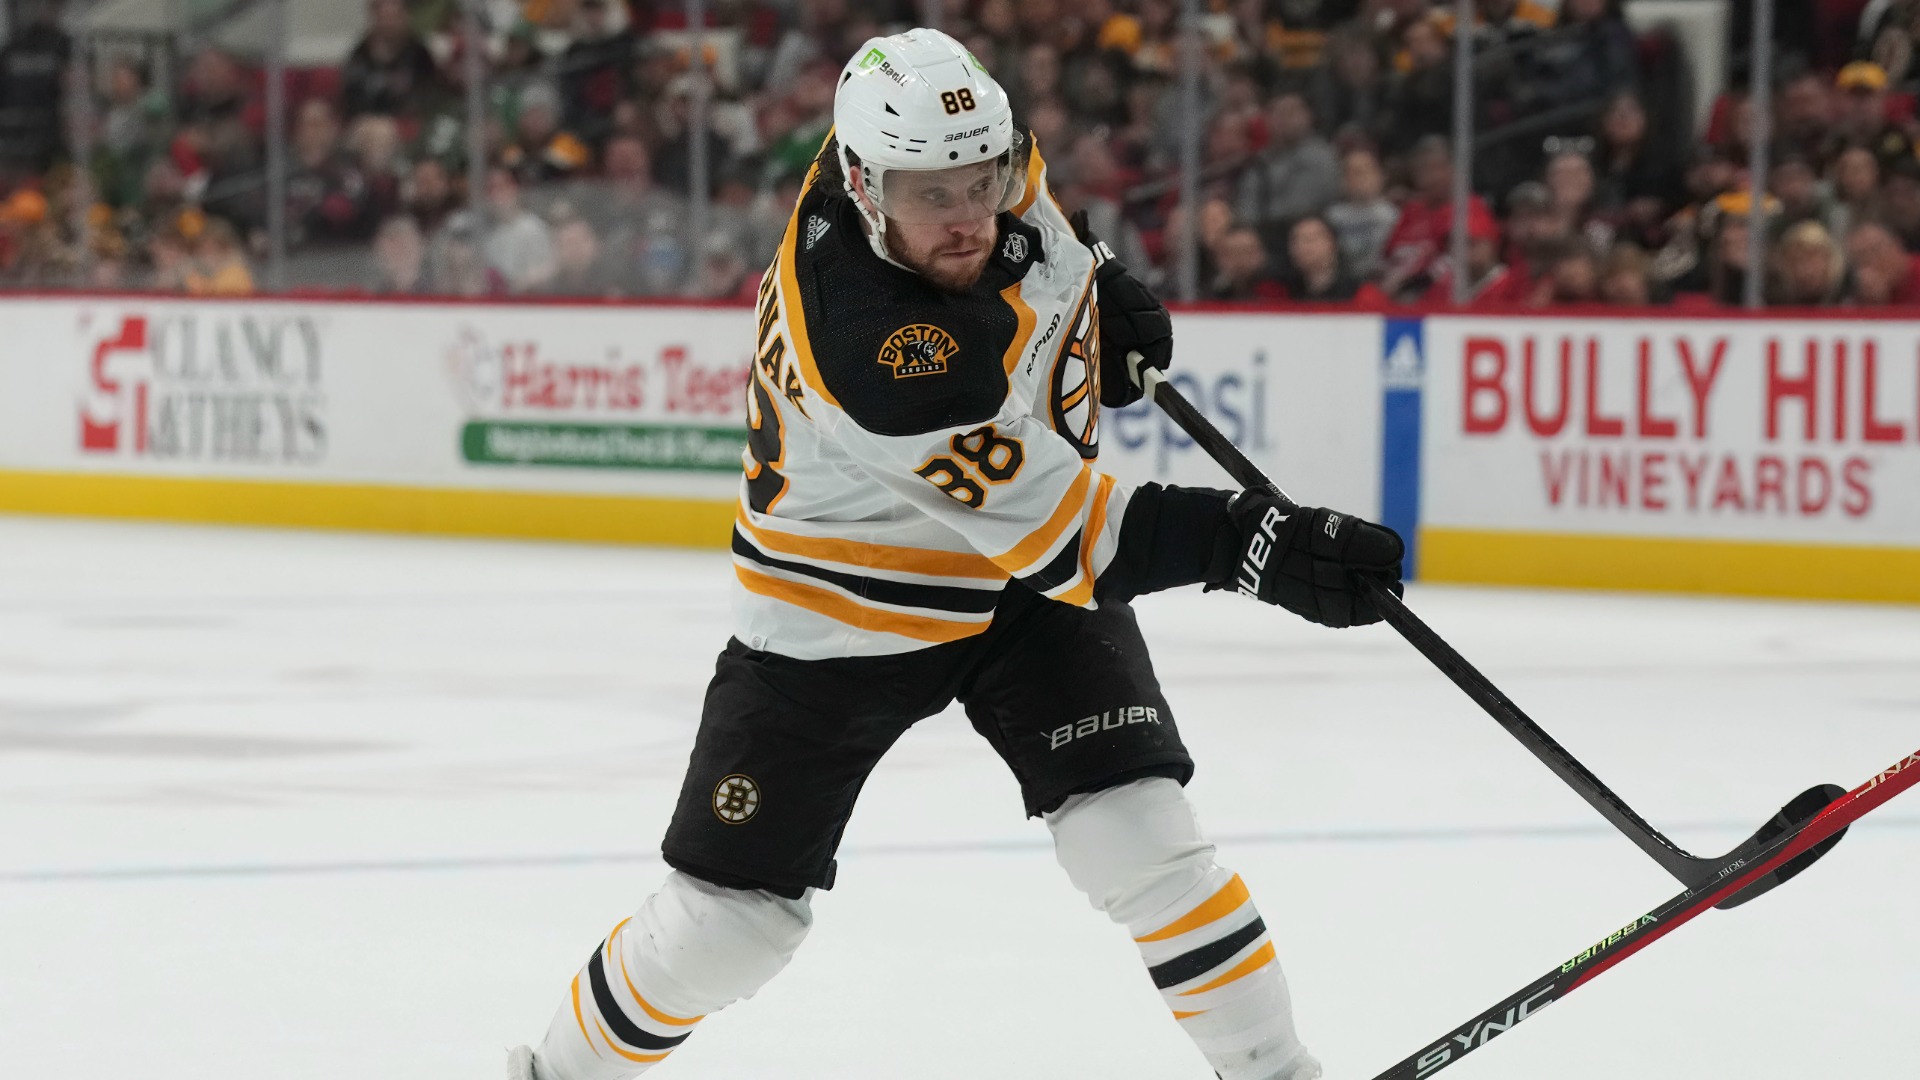 NHL Style Rankings: King David Pastrnak Returns, but There's a New